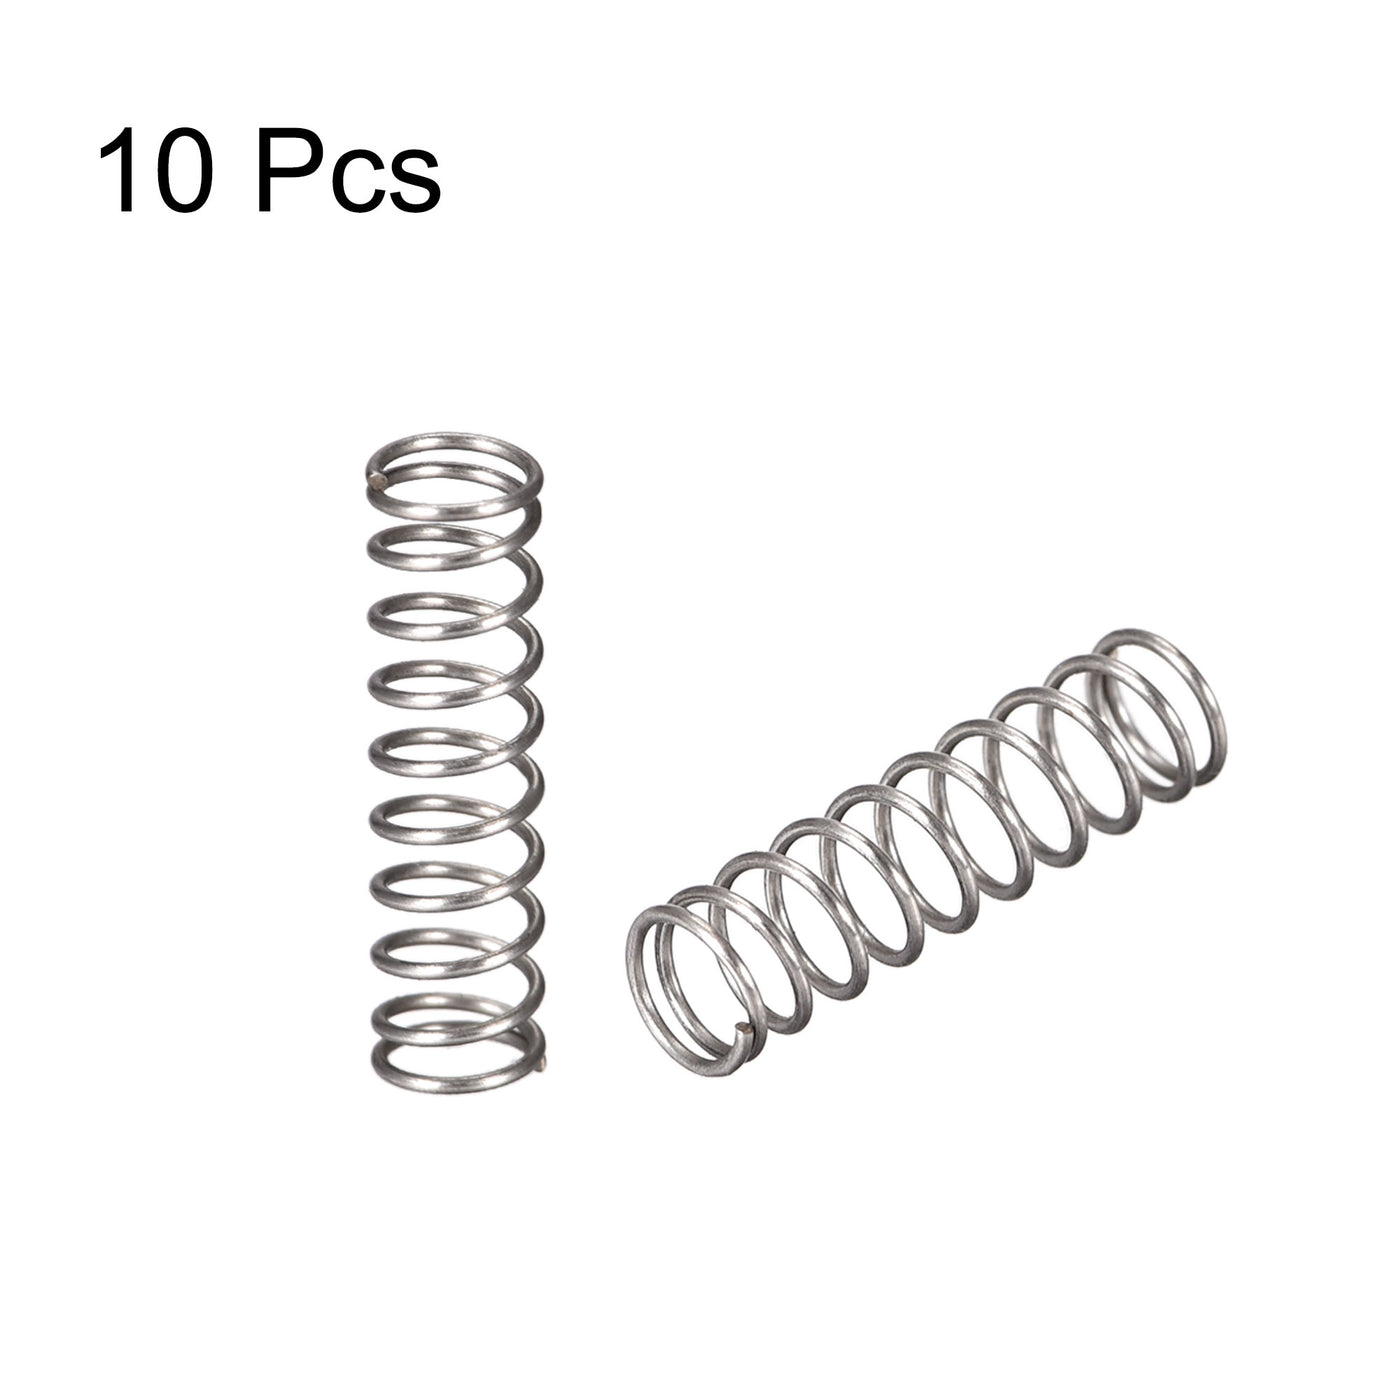 uxcell Uxcell Compressed Spring,4mmx0.4mmx15mm Free Length,7.1N Load Capacity,Gray,10pcs